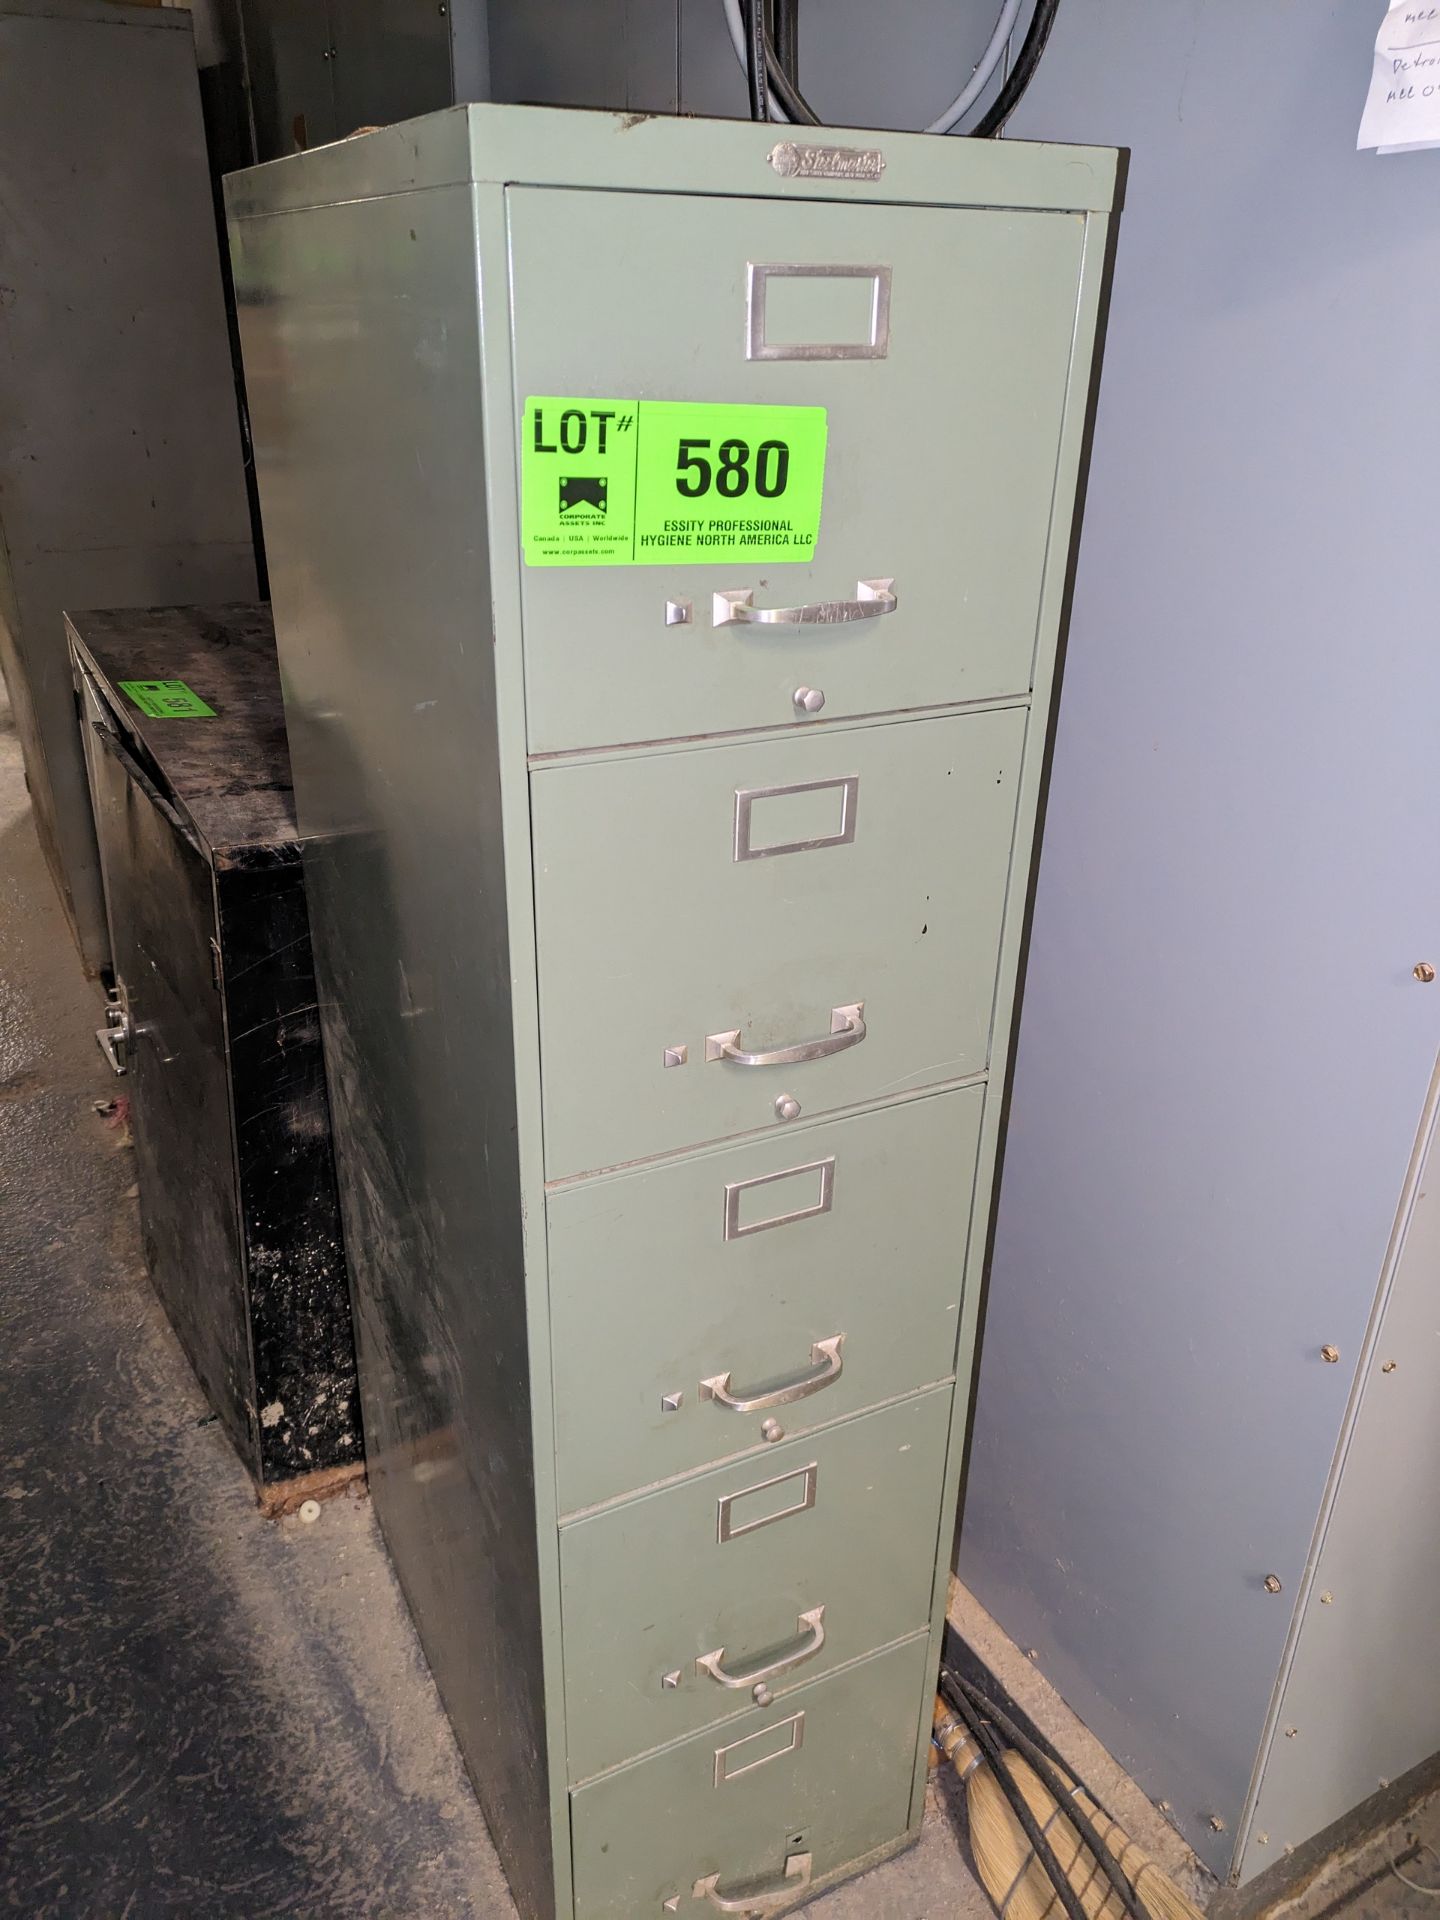 LOT/ CABINET WITH FUSES AND SPARES [RIGGING FEE FOR LOT #580 - $50 USD PLUS APPLICABLE TAXES]